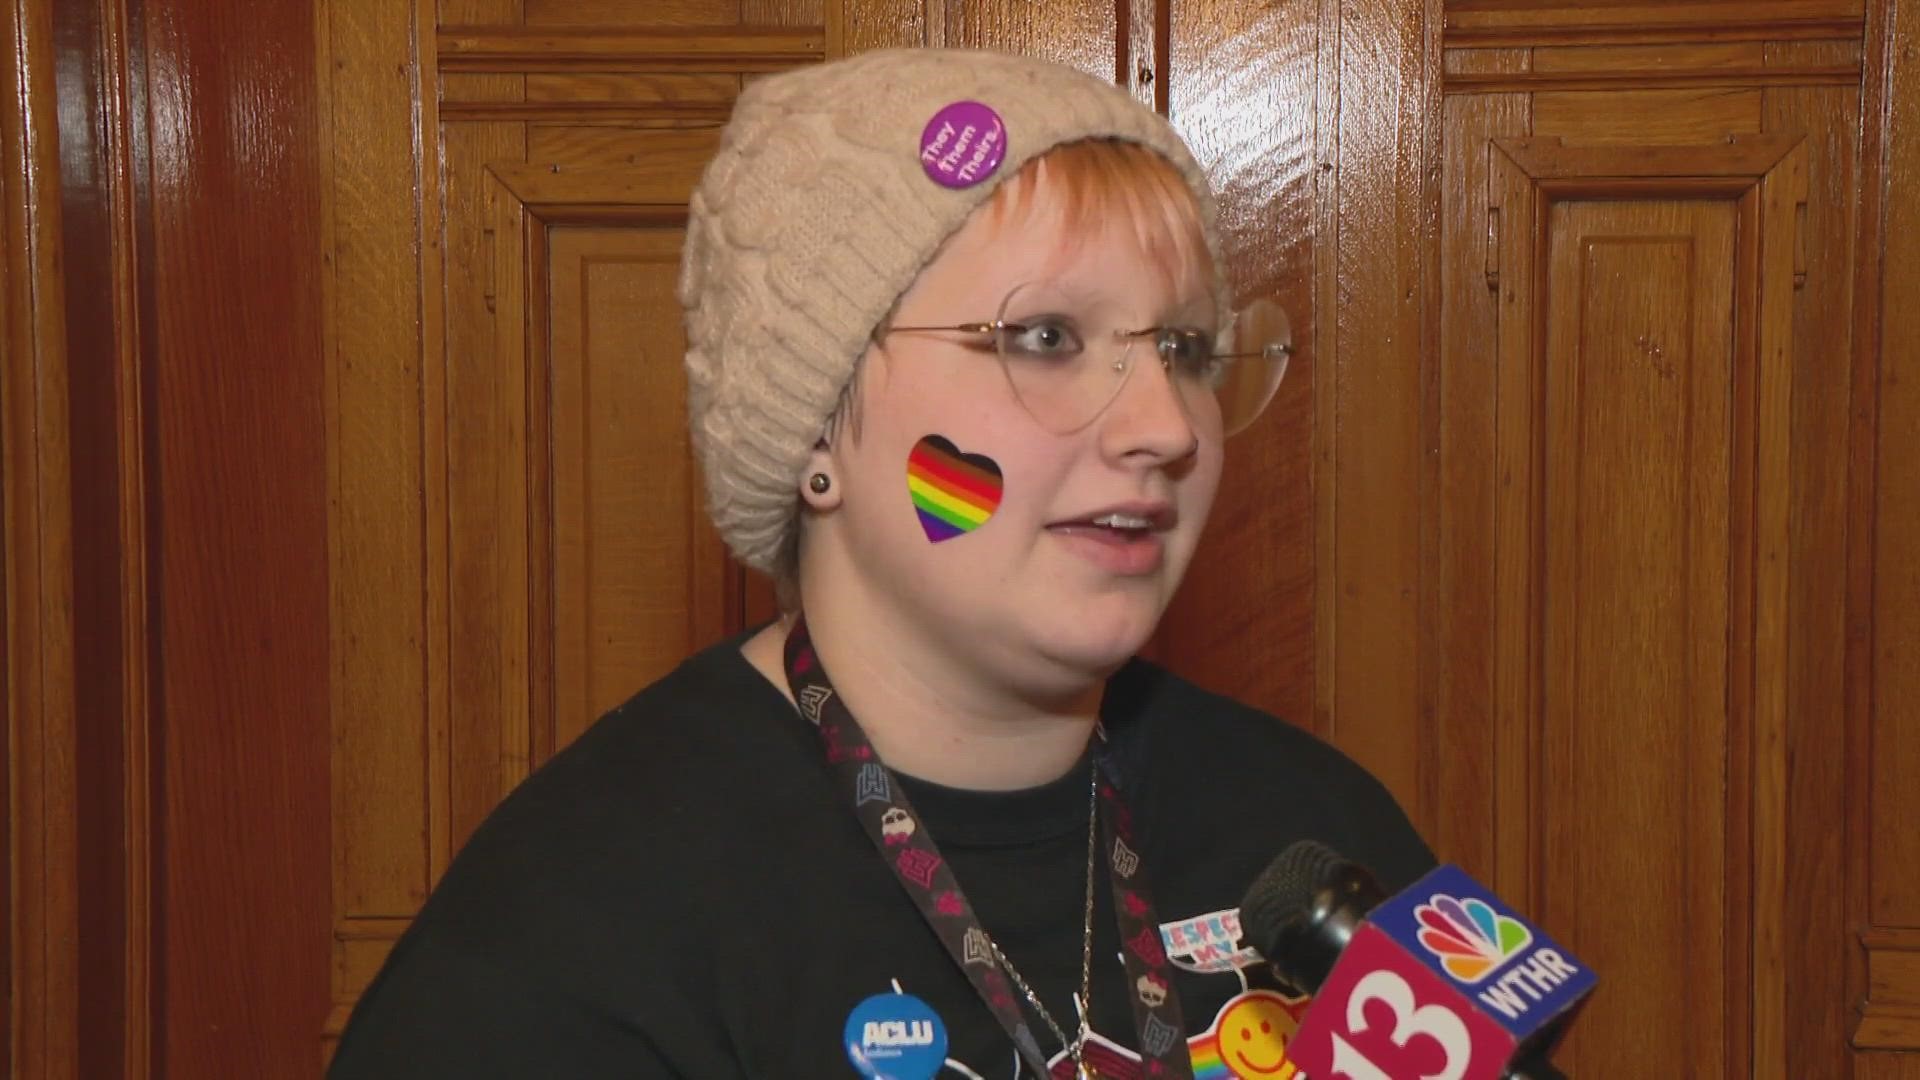 Hundreds of LGBTQ people and their allies took to the statehouse Monday in opposition of several bills.